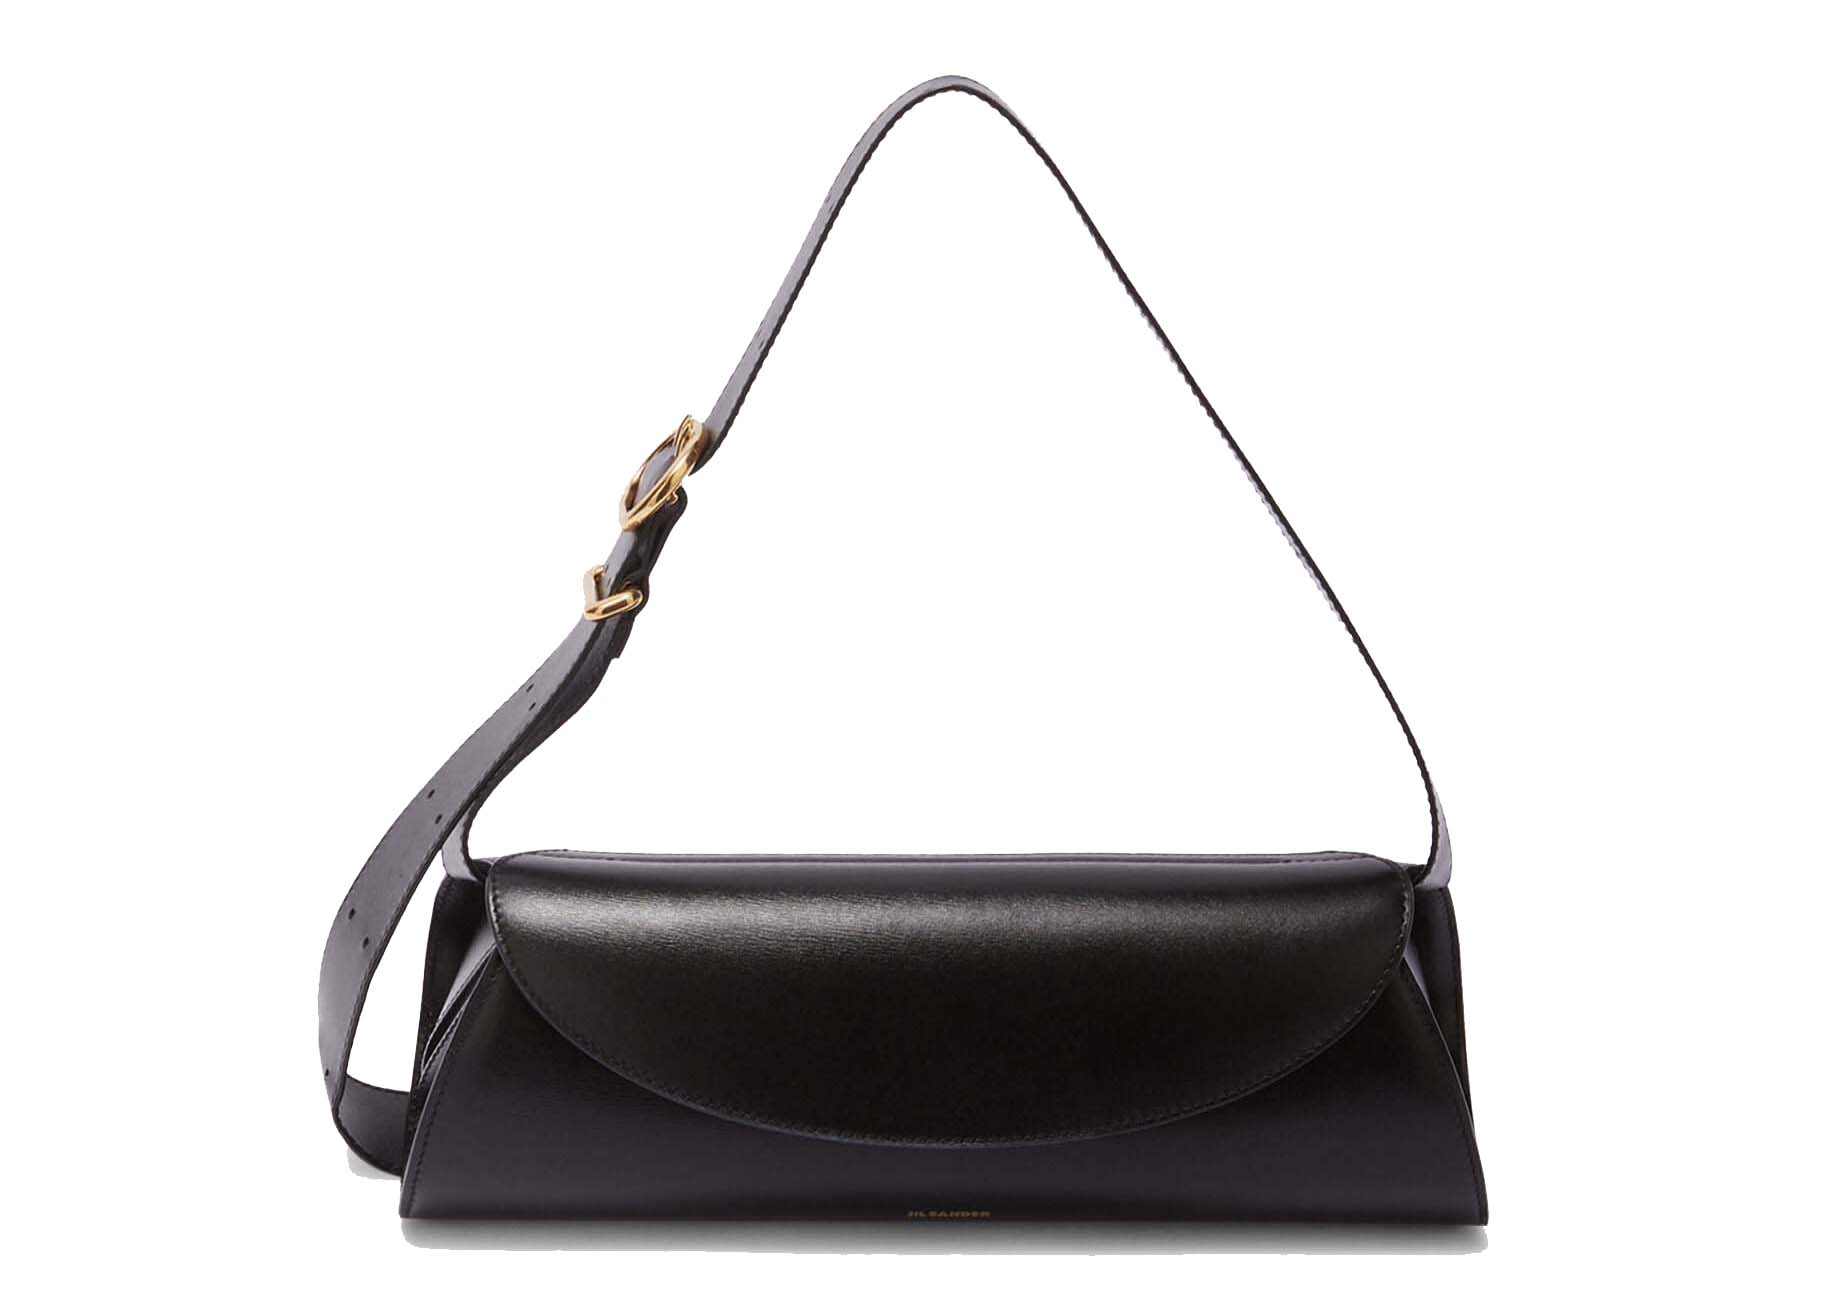 Jil Sander Cannolo Small Bag Black in Calfsin Leather with